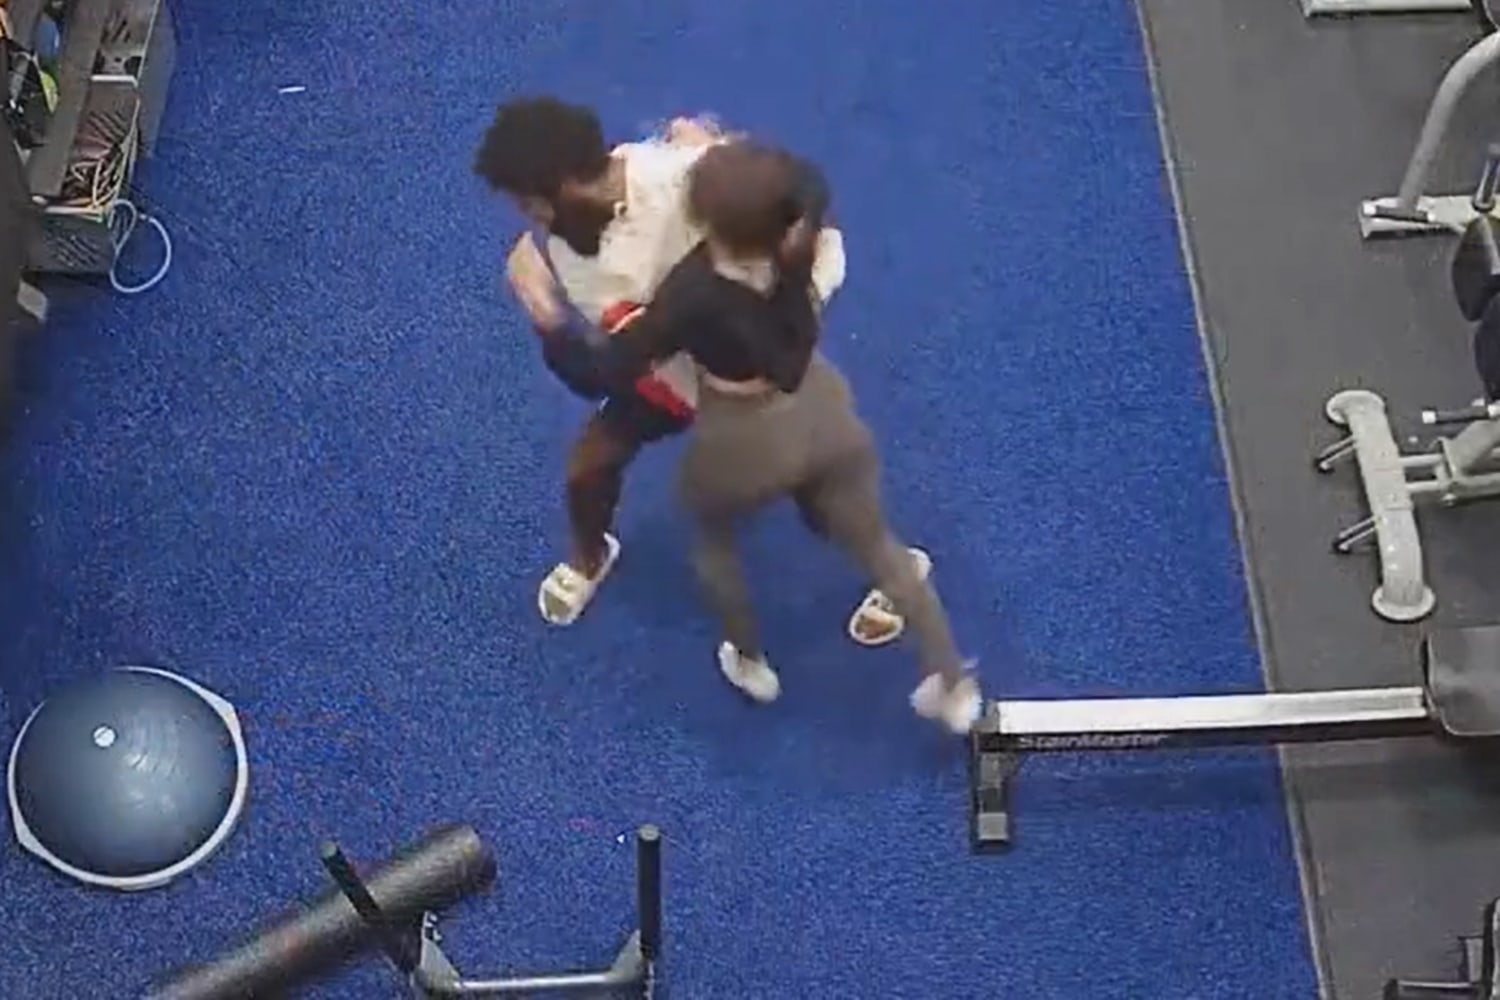 Woman fights off a man at a Florida gym in dramatic video image